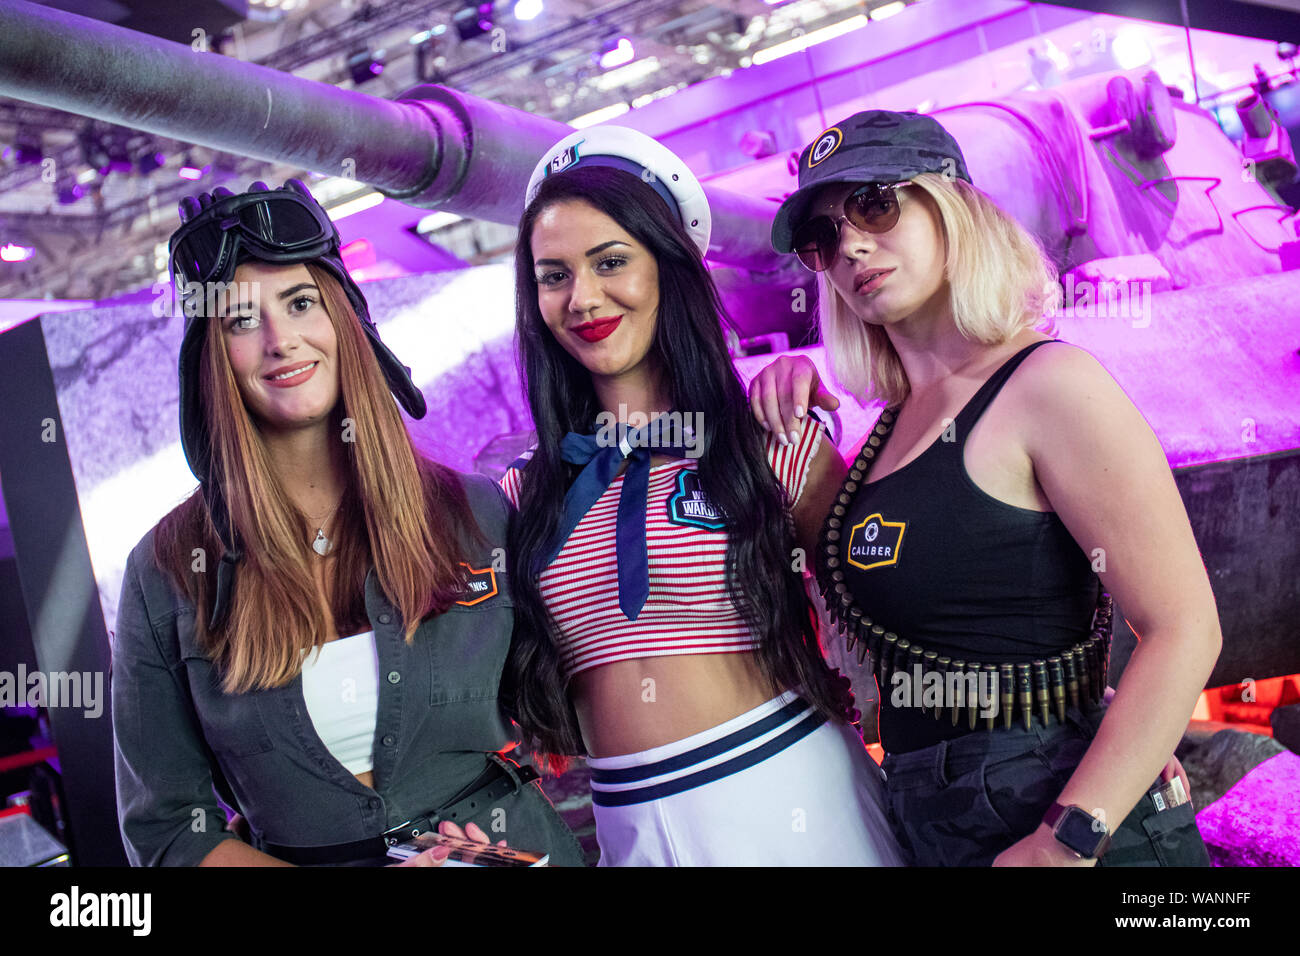 Cologne, Germany. 20th Aug, 2019. Gamescom 2019: Promoters in military uniform presenting war games of publisher Wargaming.net like World of Tanks or World of Warships. Gamescom is the world's largest trade fair for computer and video games, at Koelnmesse in Cologne, Germany, from 20th to 24th August 2019. Photocredit: Christian Lademann Stock Photo